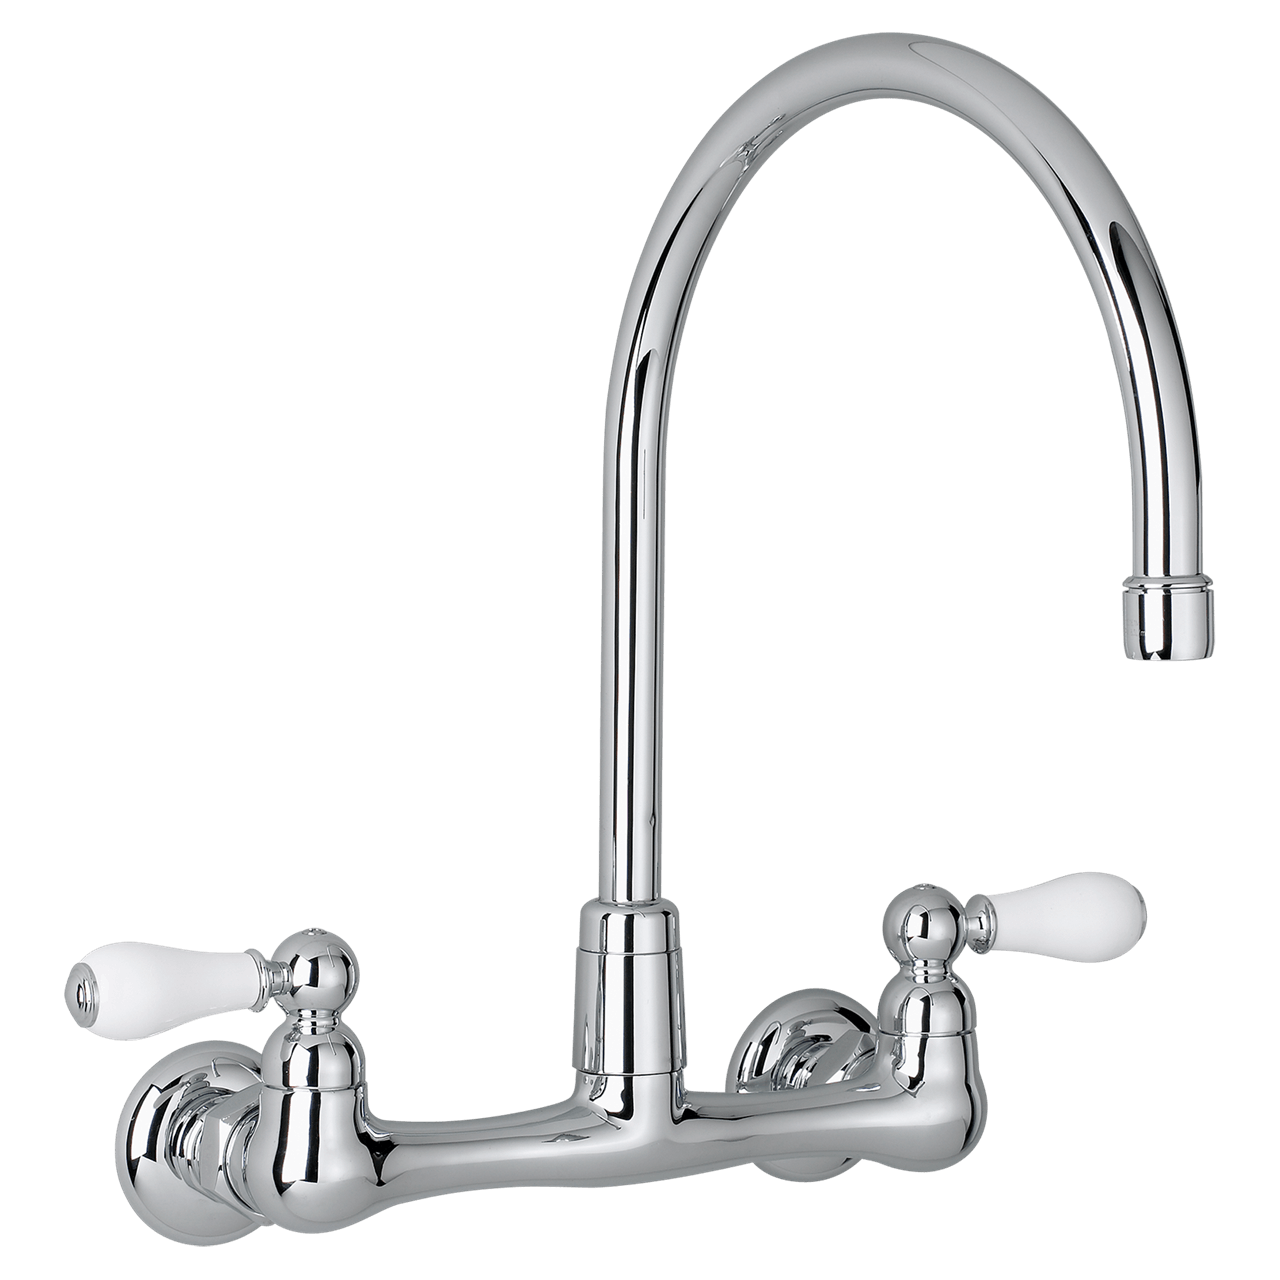 7293252002 heritage 2 handle high arc wall mount kitchen faucet